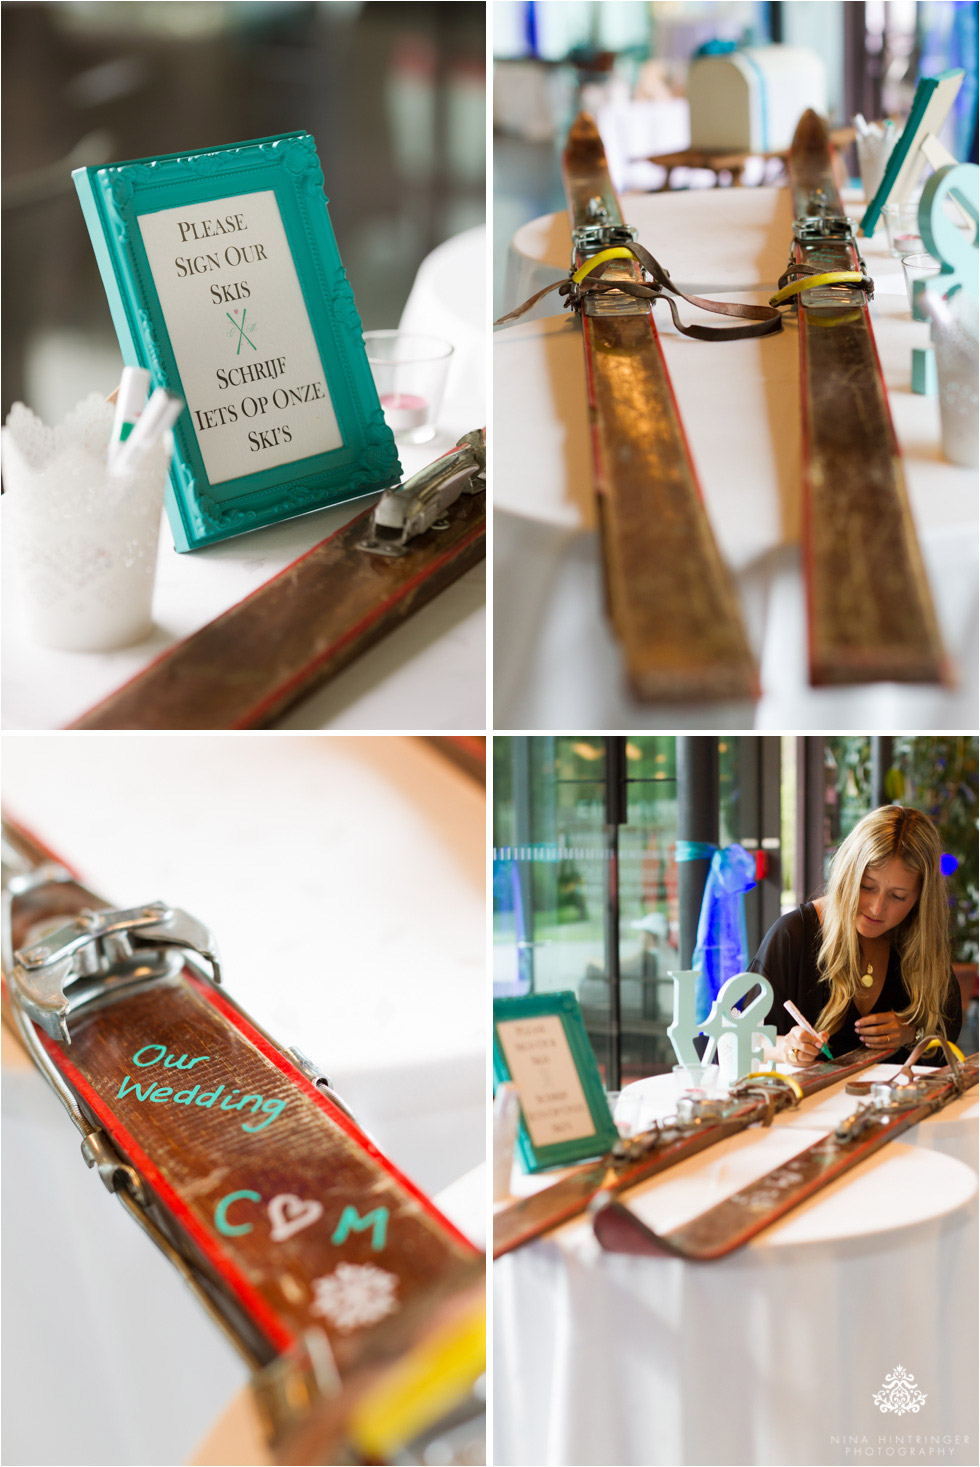 Ski-Inspired Summer Wedding | Cat & Menno and their Tiffany Blue Color Theme - Blog of Nina Hintringer Photography - Wedding Photography, Wedding Reportage and Destination Weddings